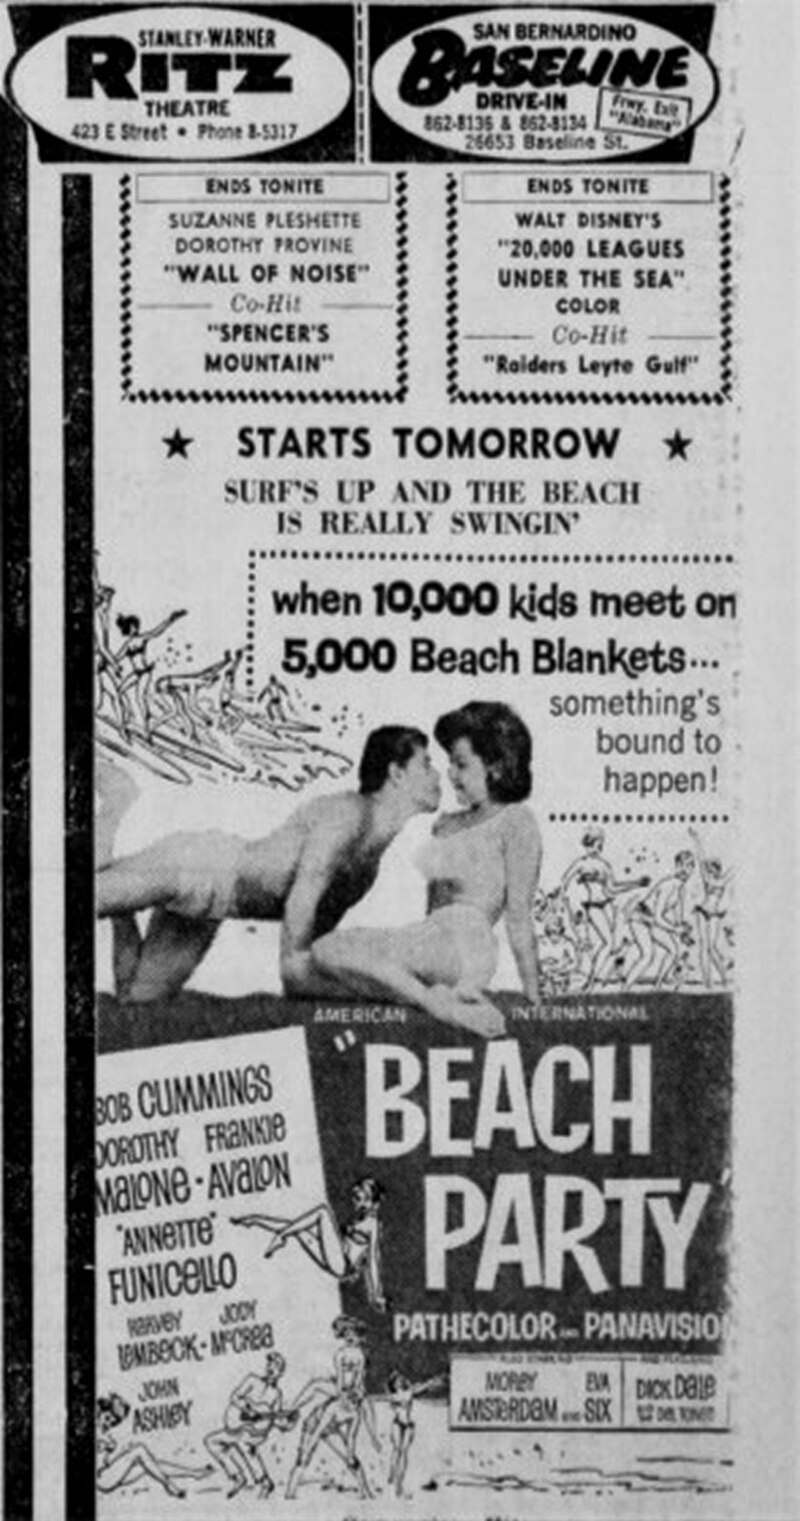 "Beach Party" - Advertisement from 1963